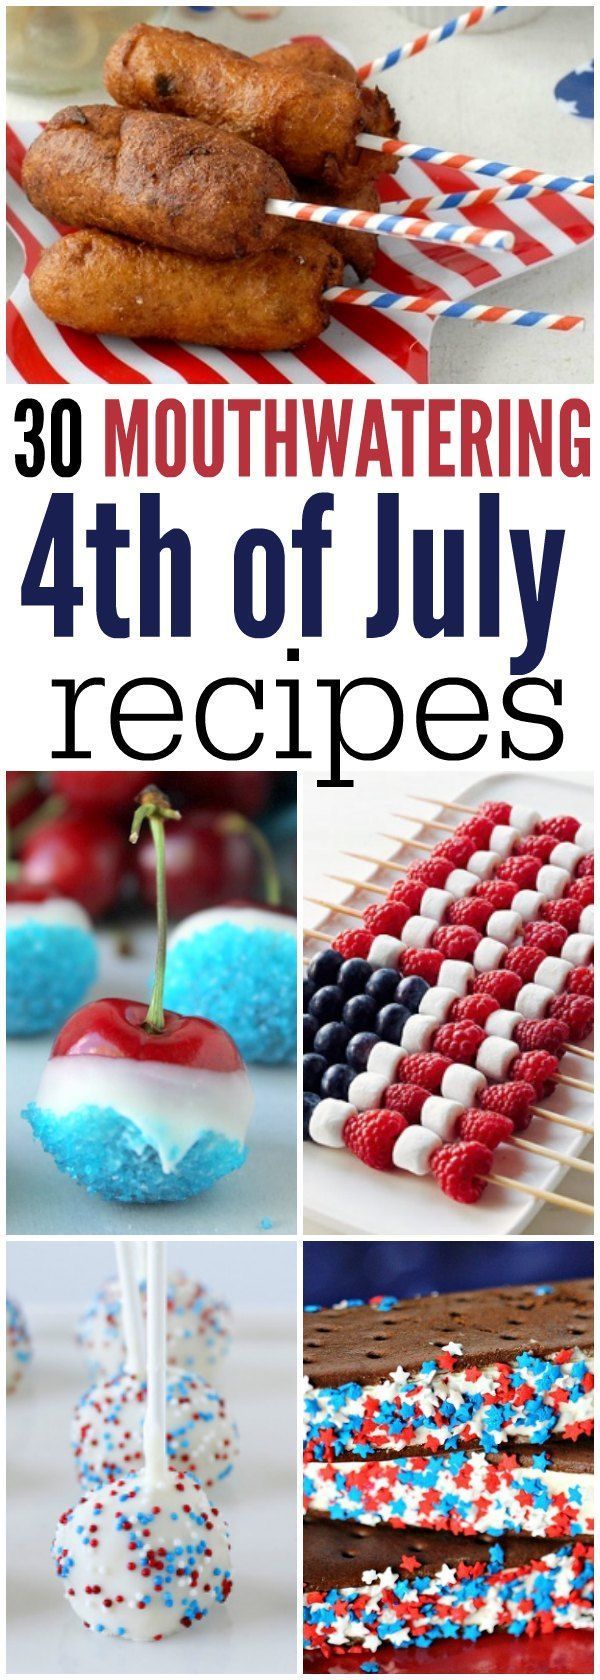 4th of July Recipes- Easy 4th of July recipes that everyone is sure to love! - 4th of July Recipes- Easy 4th of July recipes that everyone is sure to love! -   July 4th food Ideas